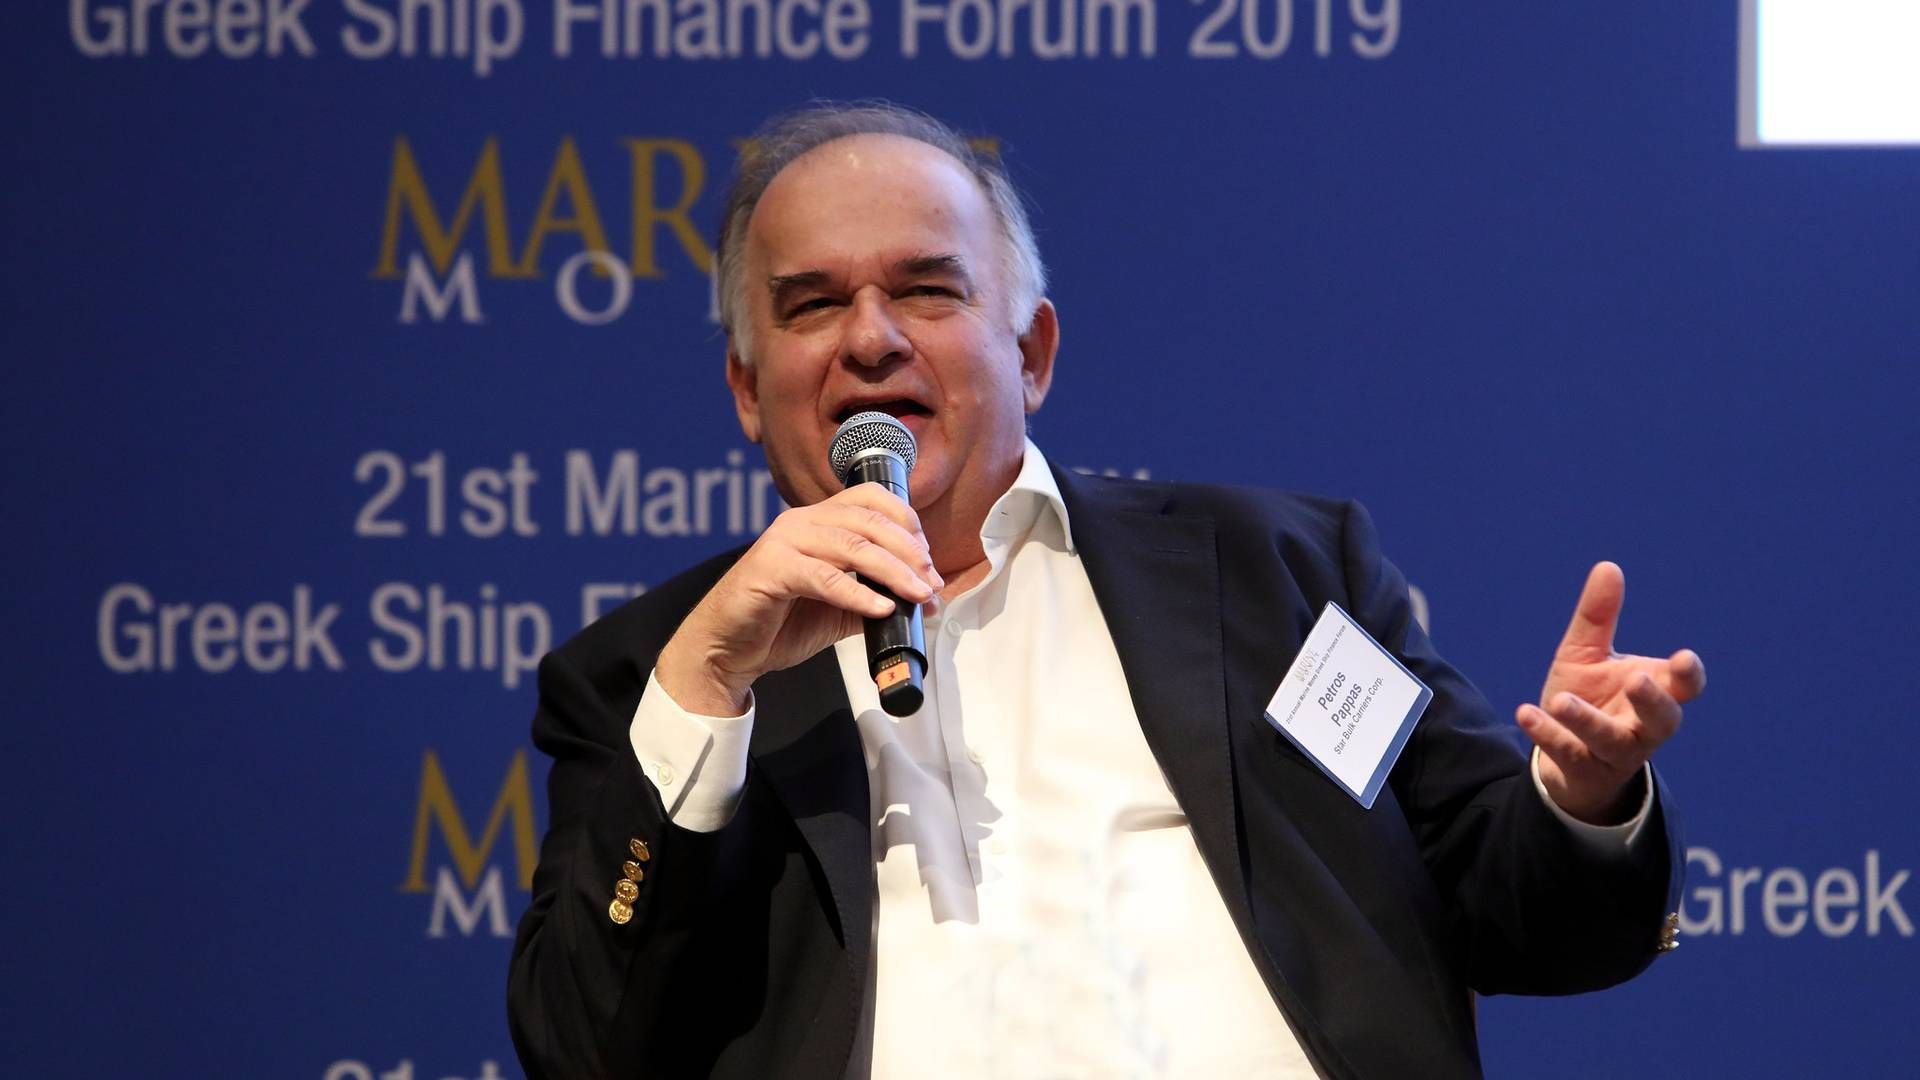 Petros Pappas is the chief executive of Star Bulk Carriers, based in Greece and listed on the New York Stock Exchange. | Photo: Marine Money / Thodoris Anagnostopoulos